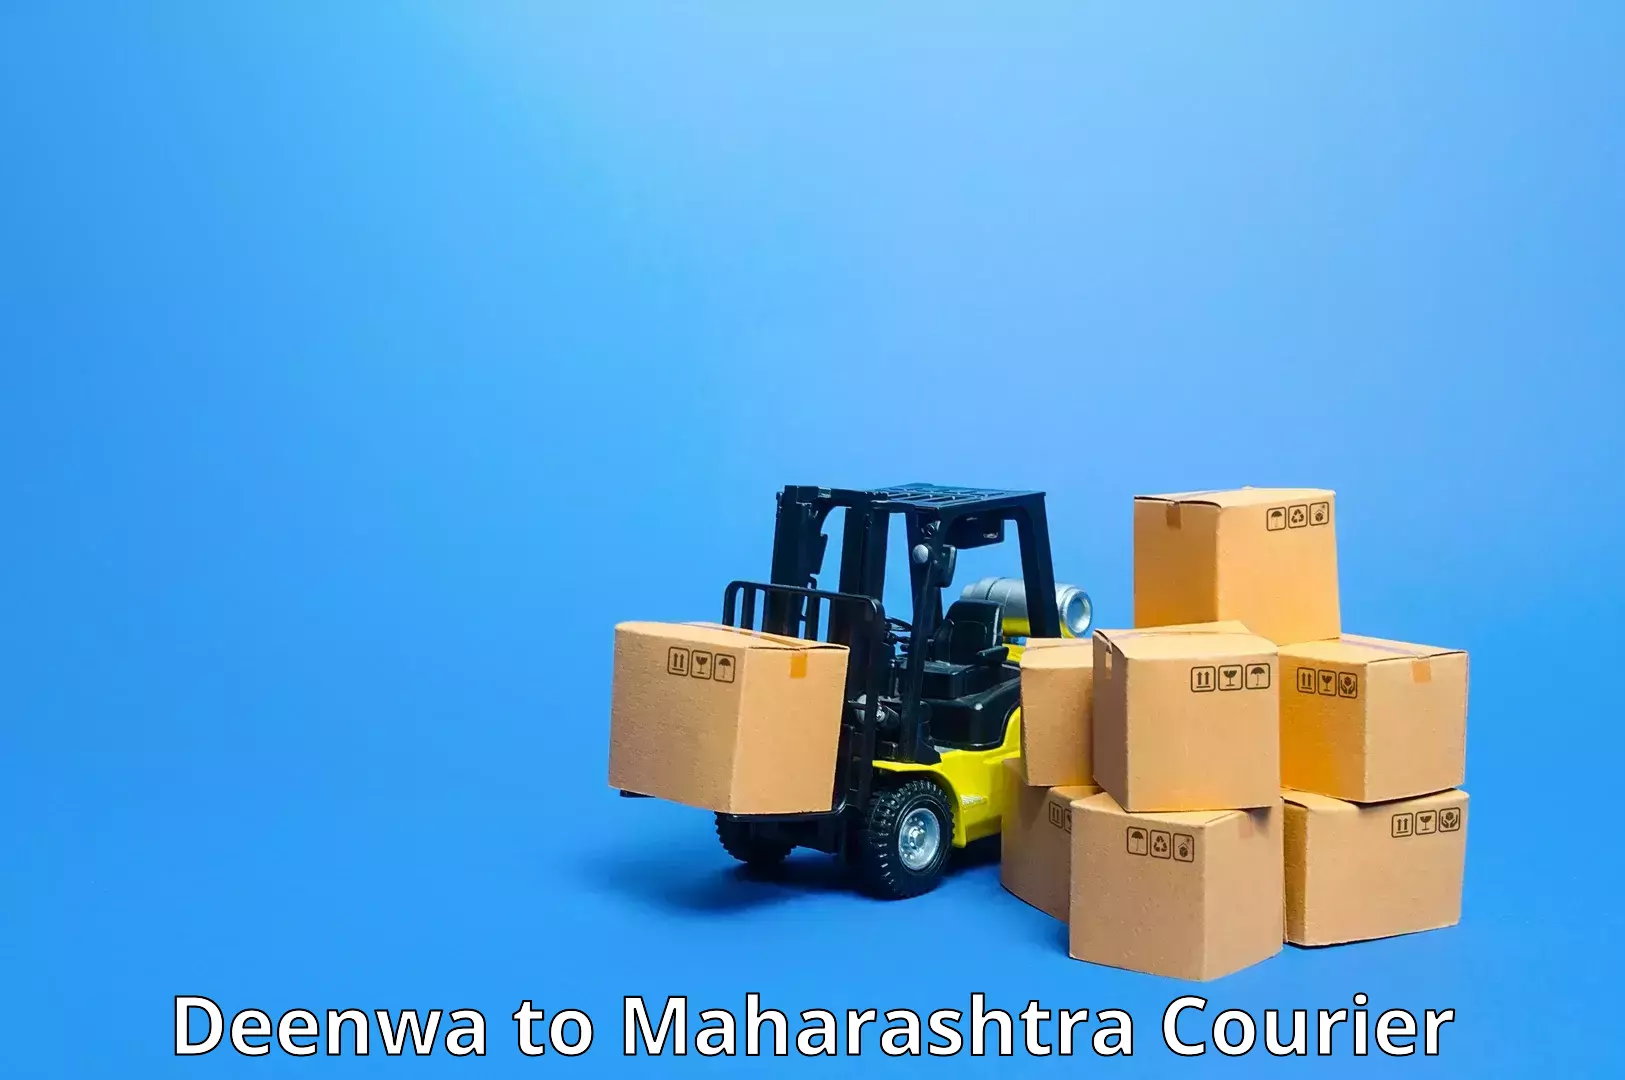 Package delivery network Deenwa to Akkalkot